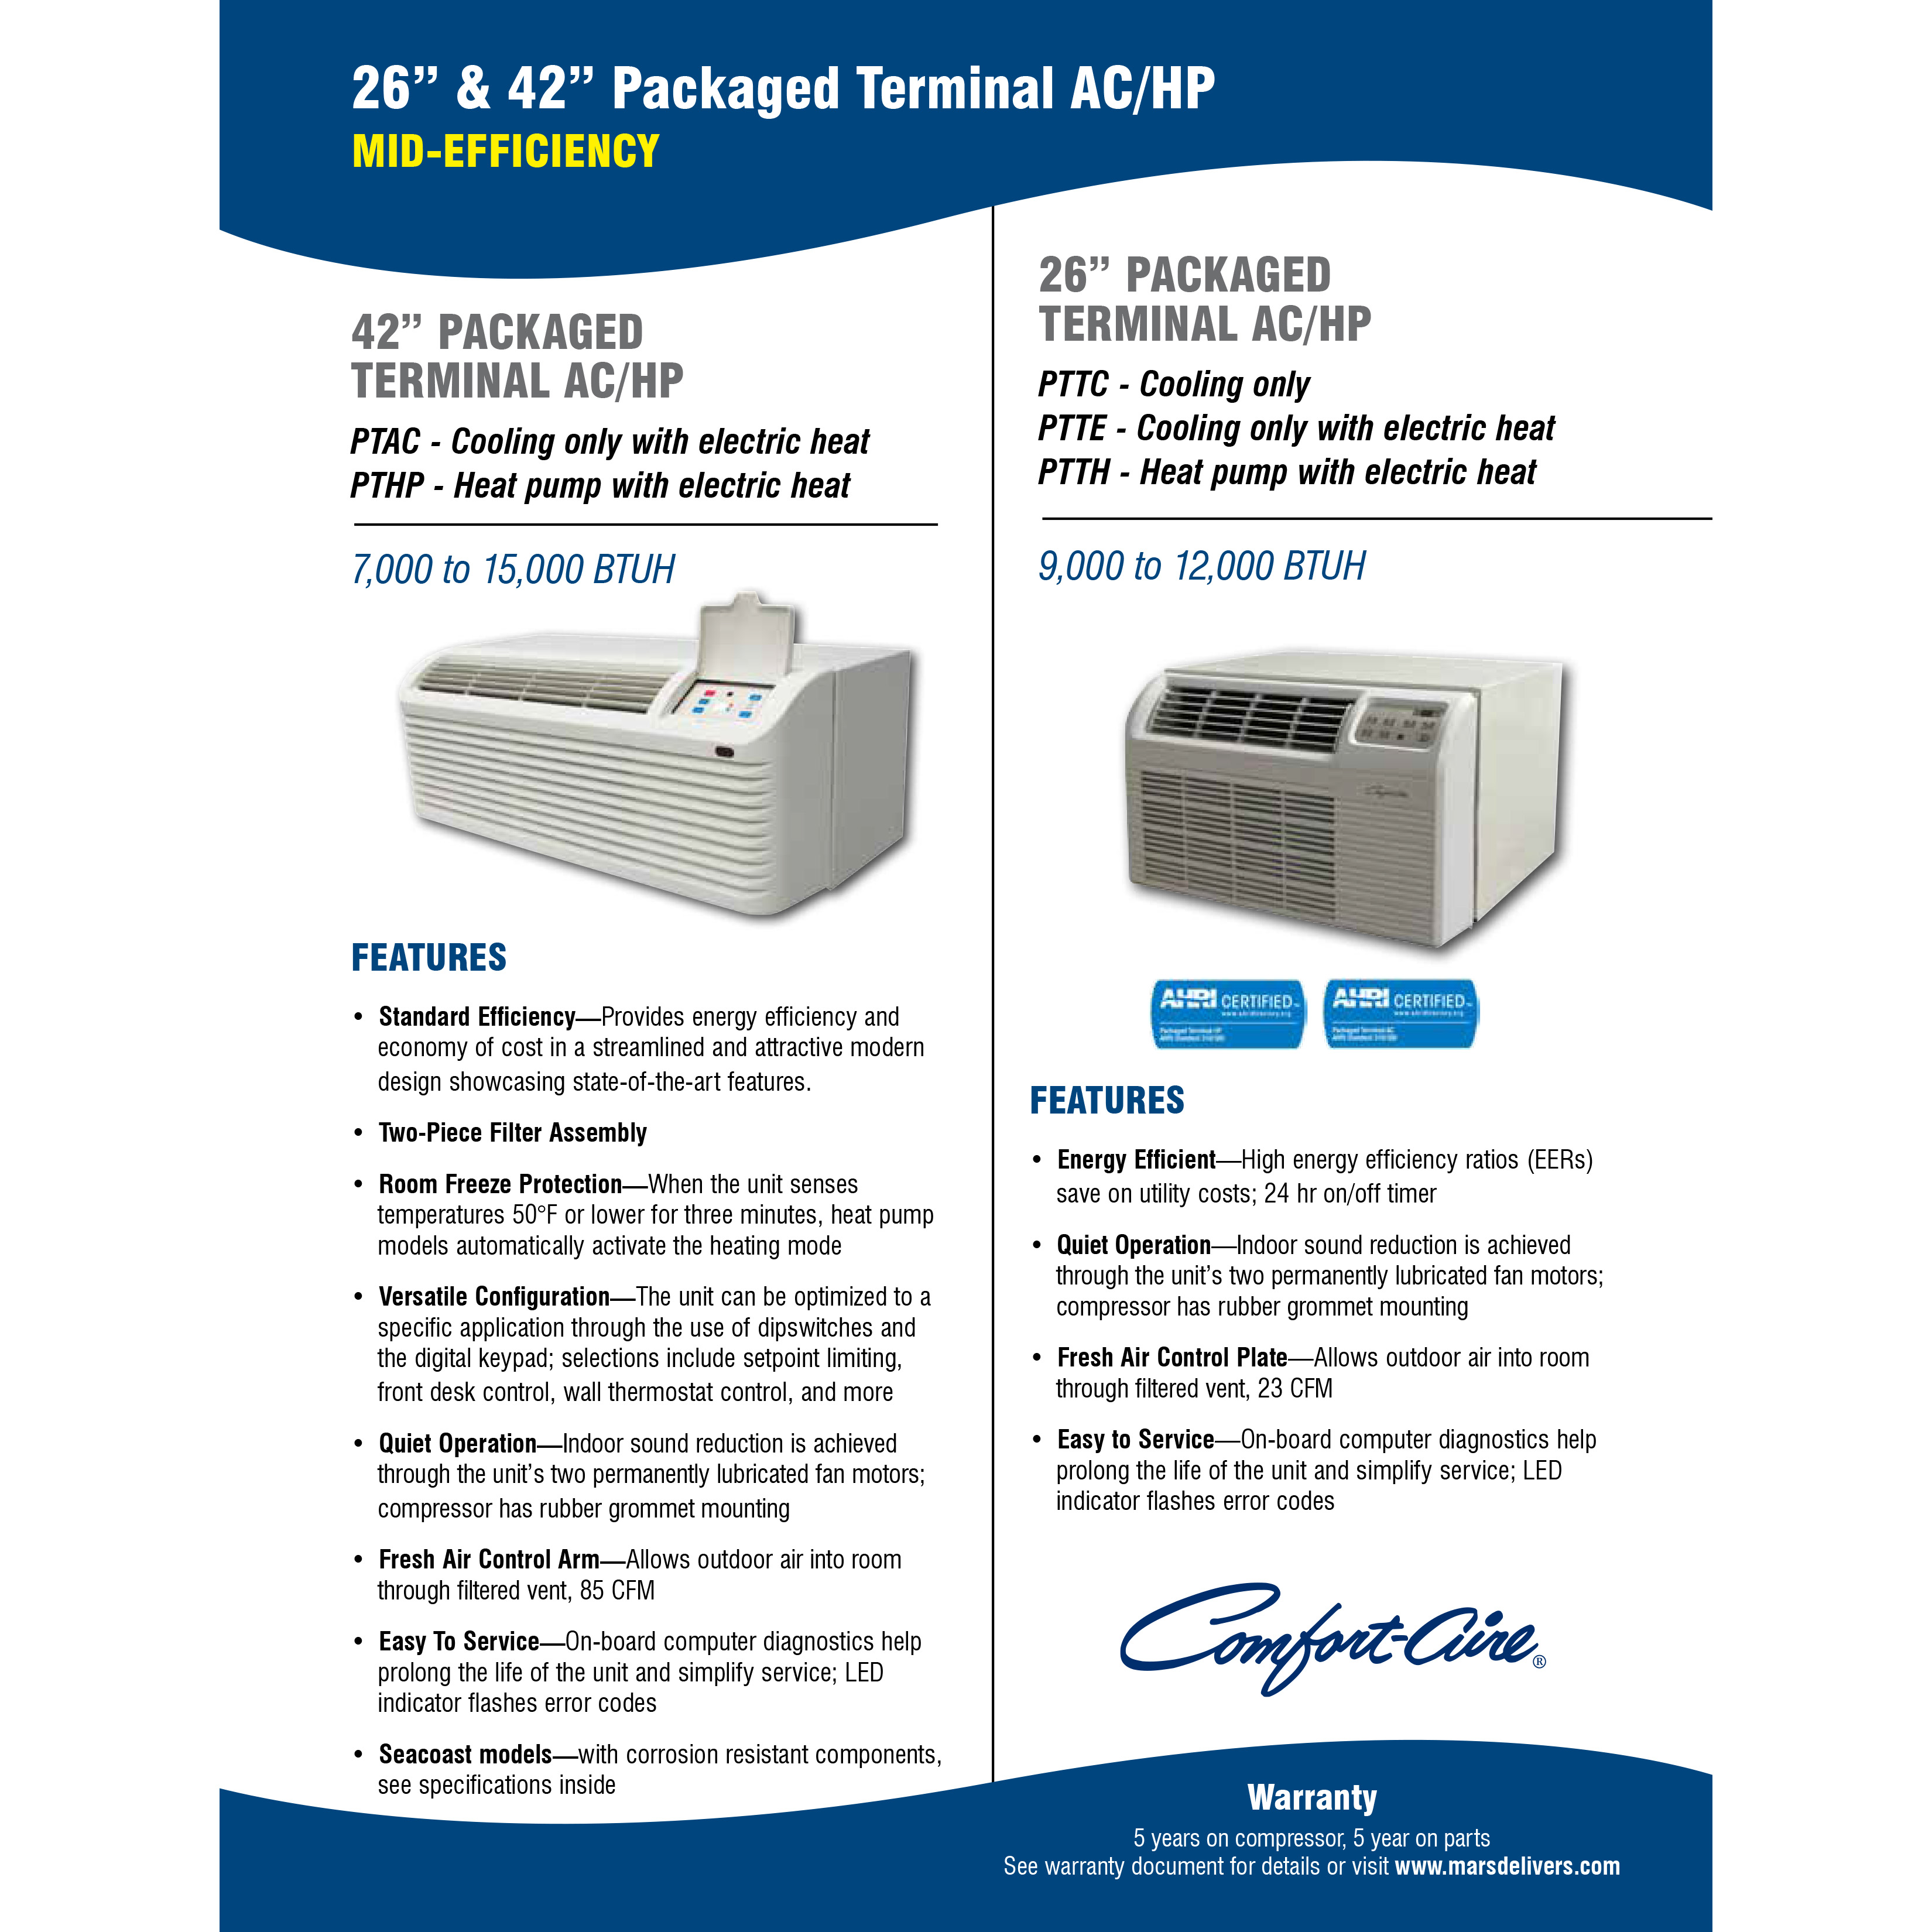 Comfort-Aire Packaged Terminal AC/HP Brochure